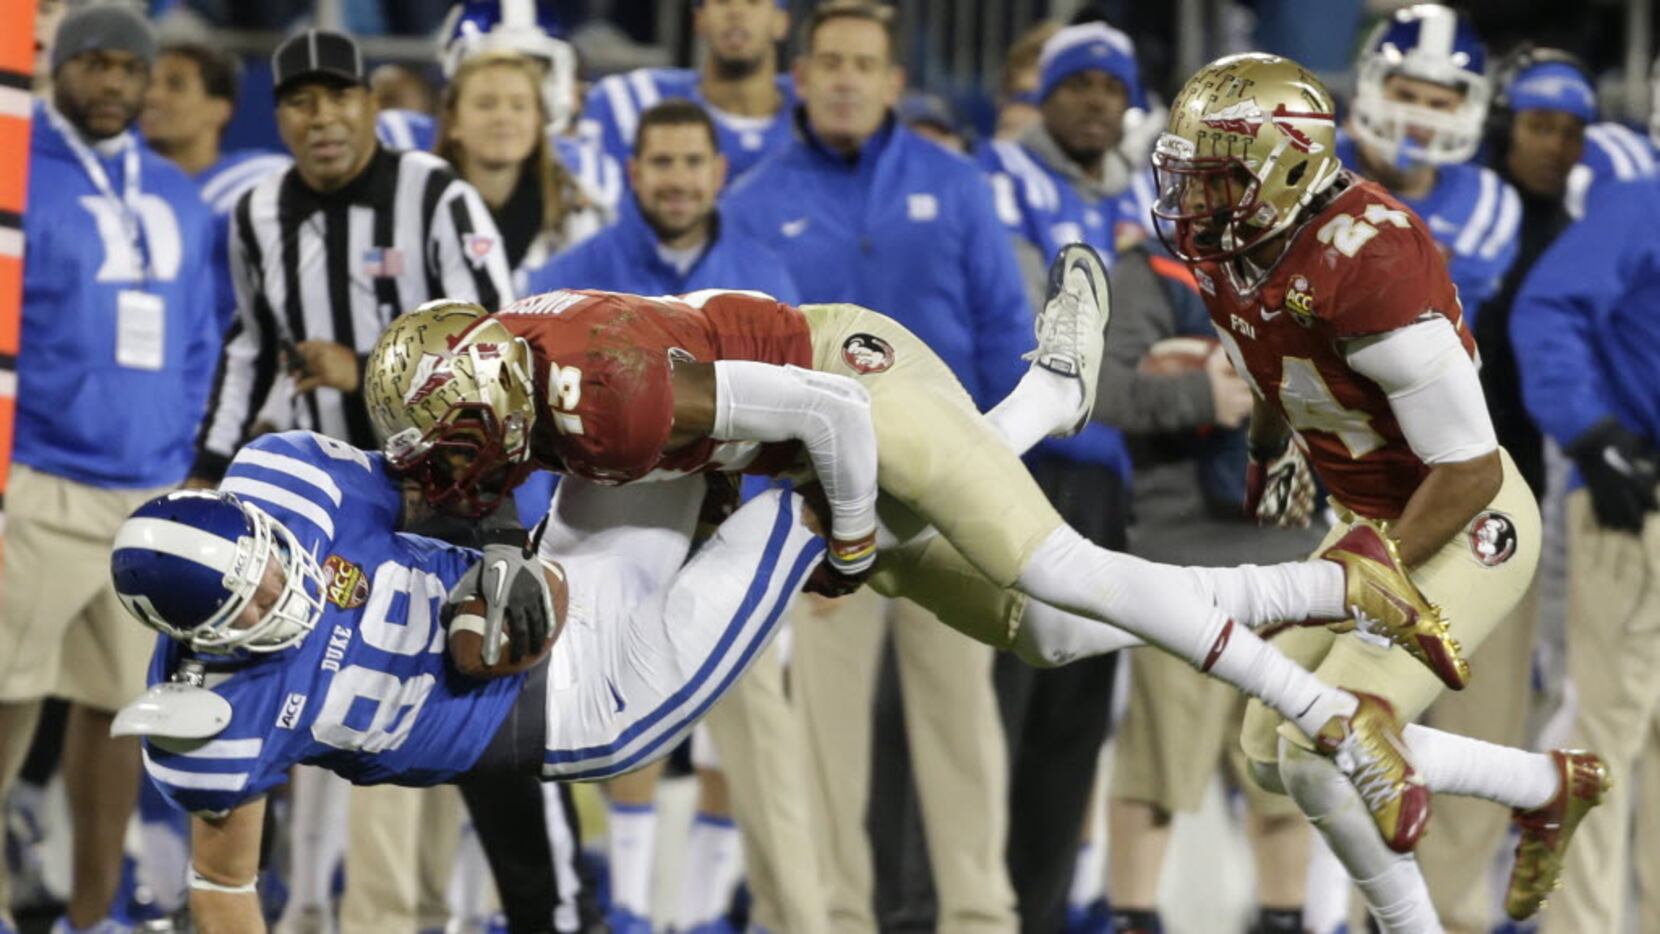 FILE - In this Saturday, Dec. 7, 2013, file photo, Duke's Braxton Deaver (89) is hit by...